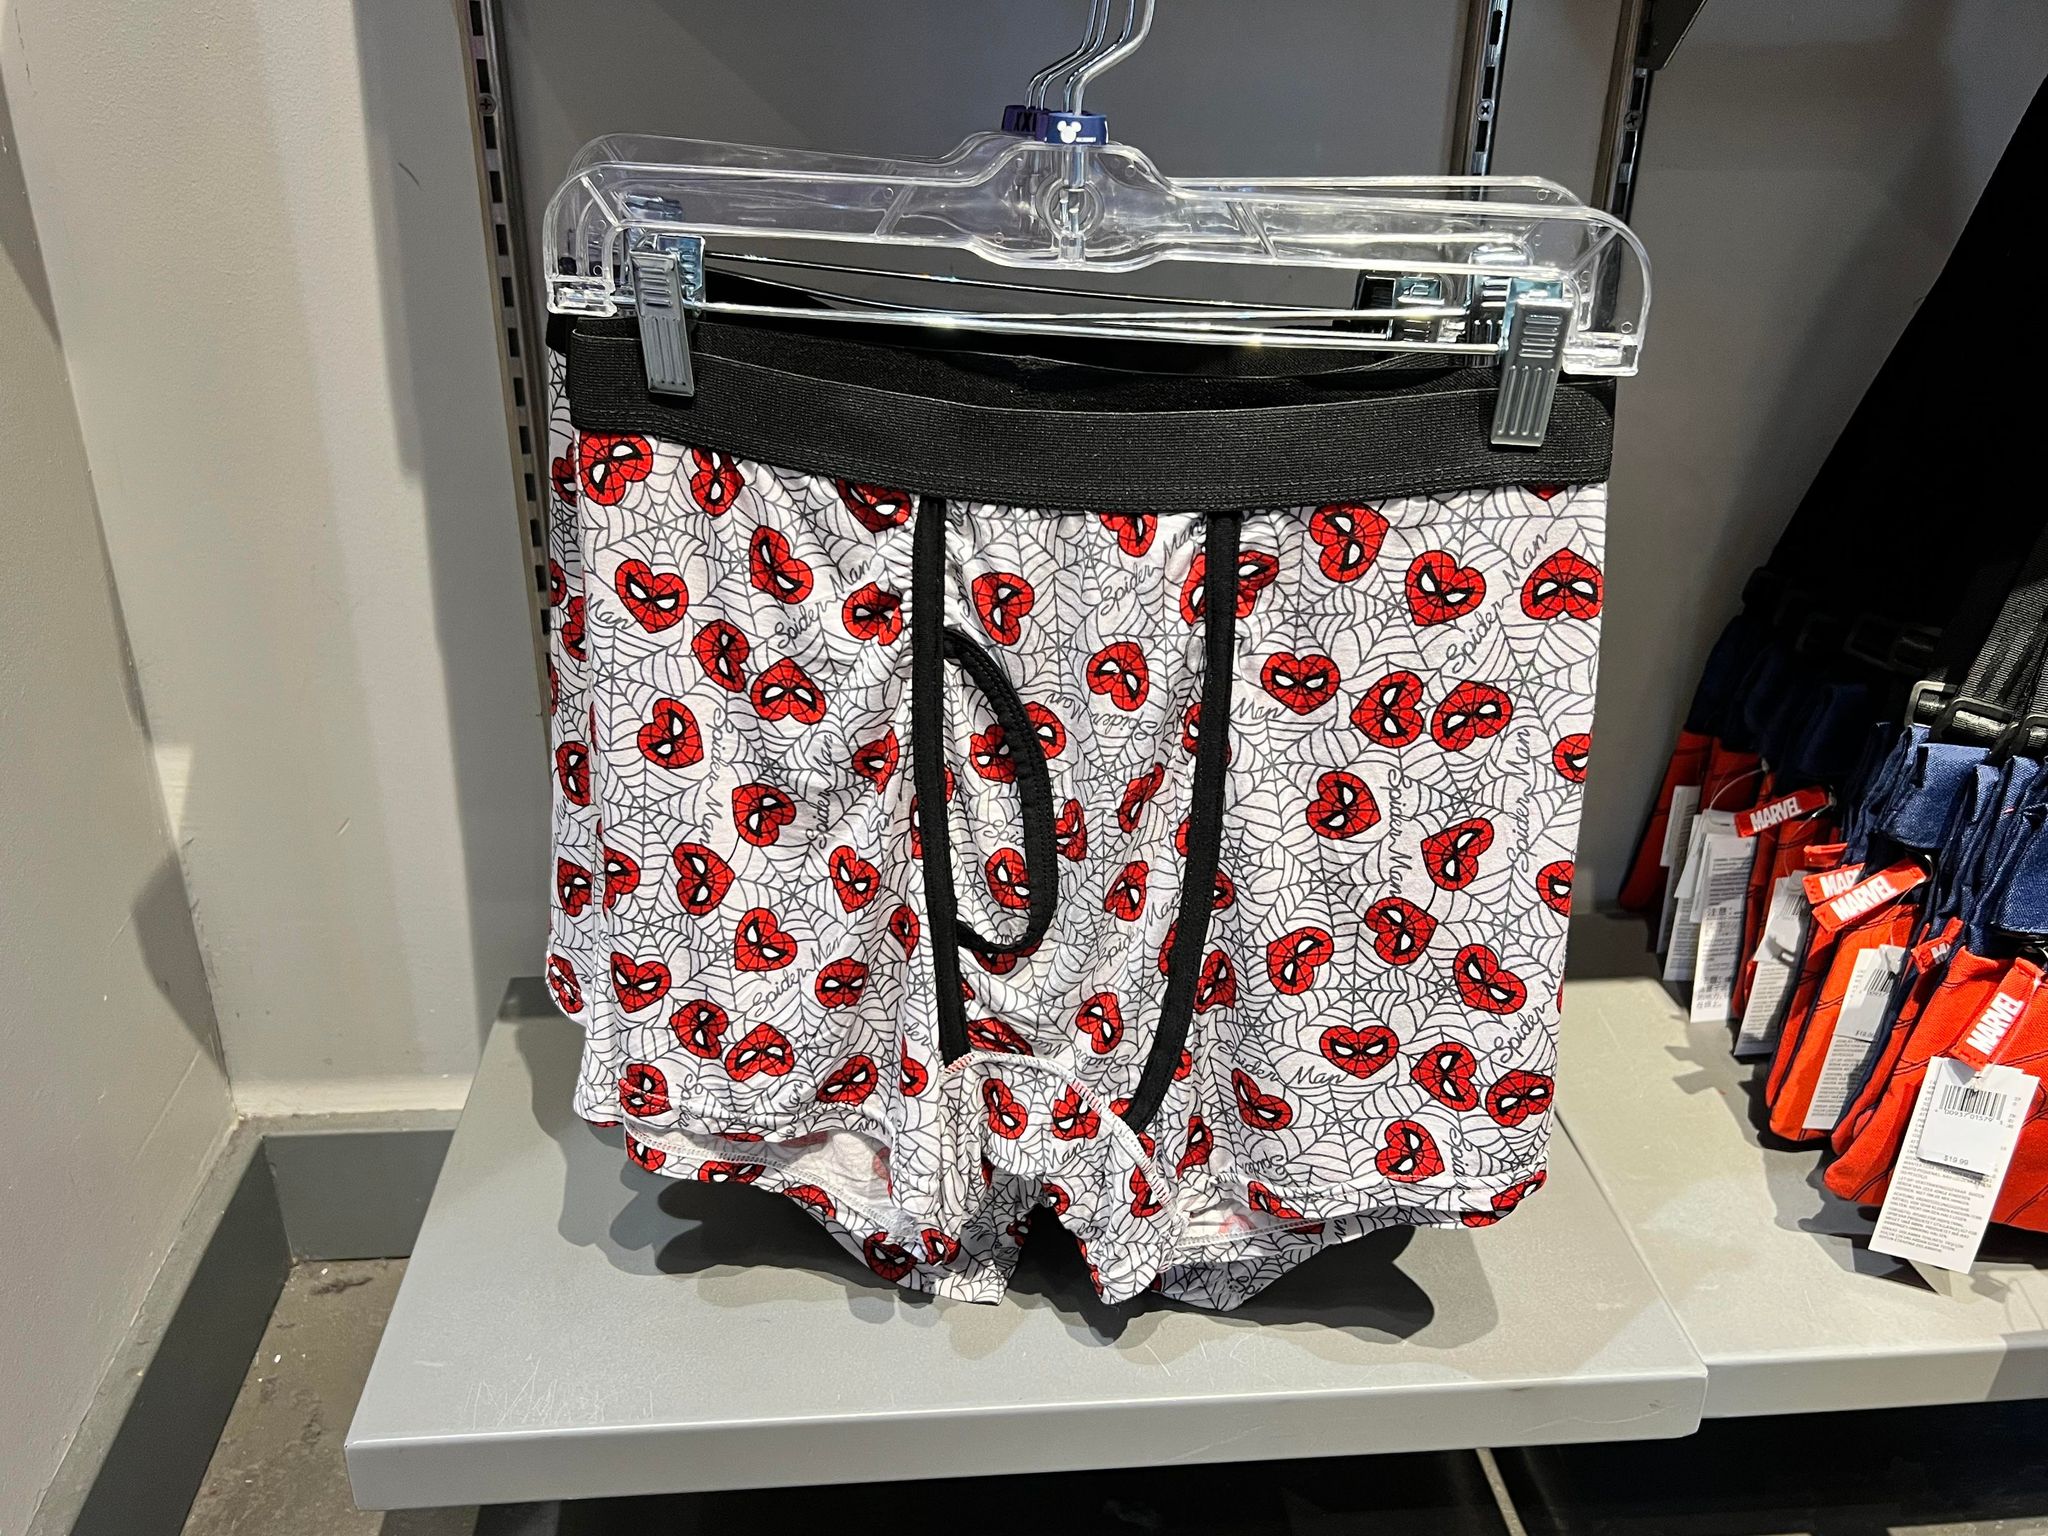 New Spider-Man Love Heart Boxers Swing into Disney Springs, Just In Time  For Valentine's Day! 